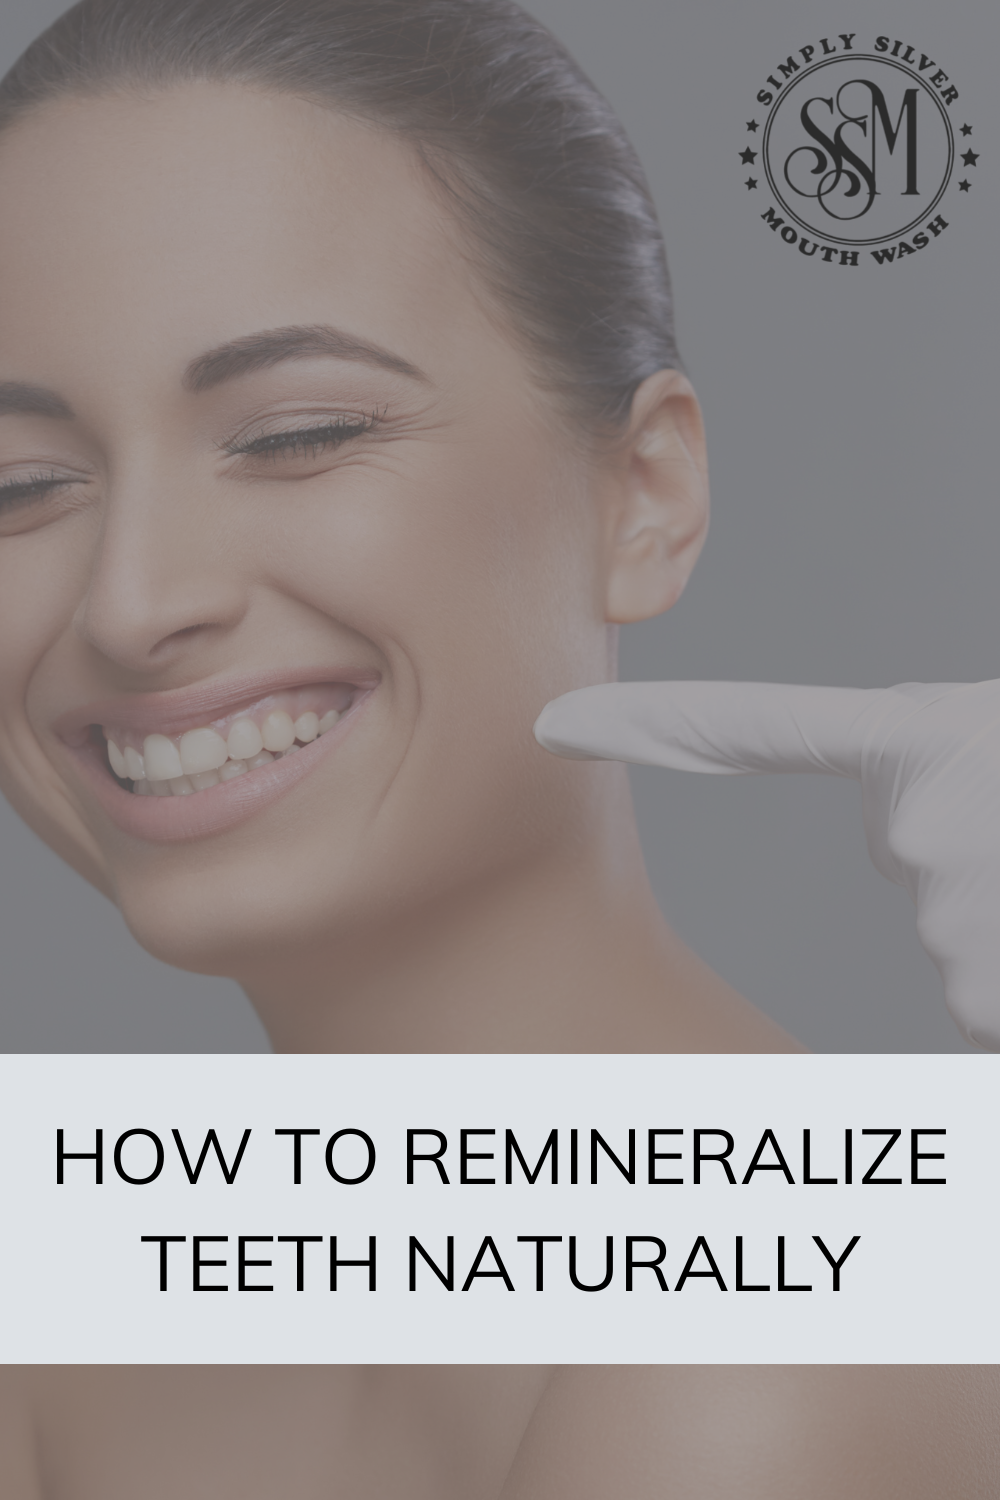 How to remineralize your teeth naturally